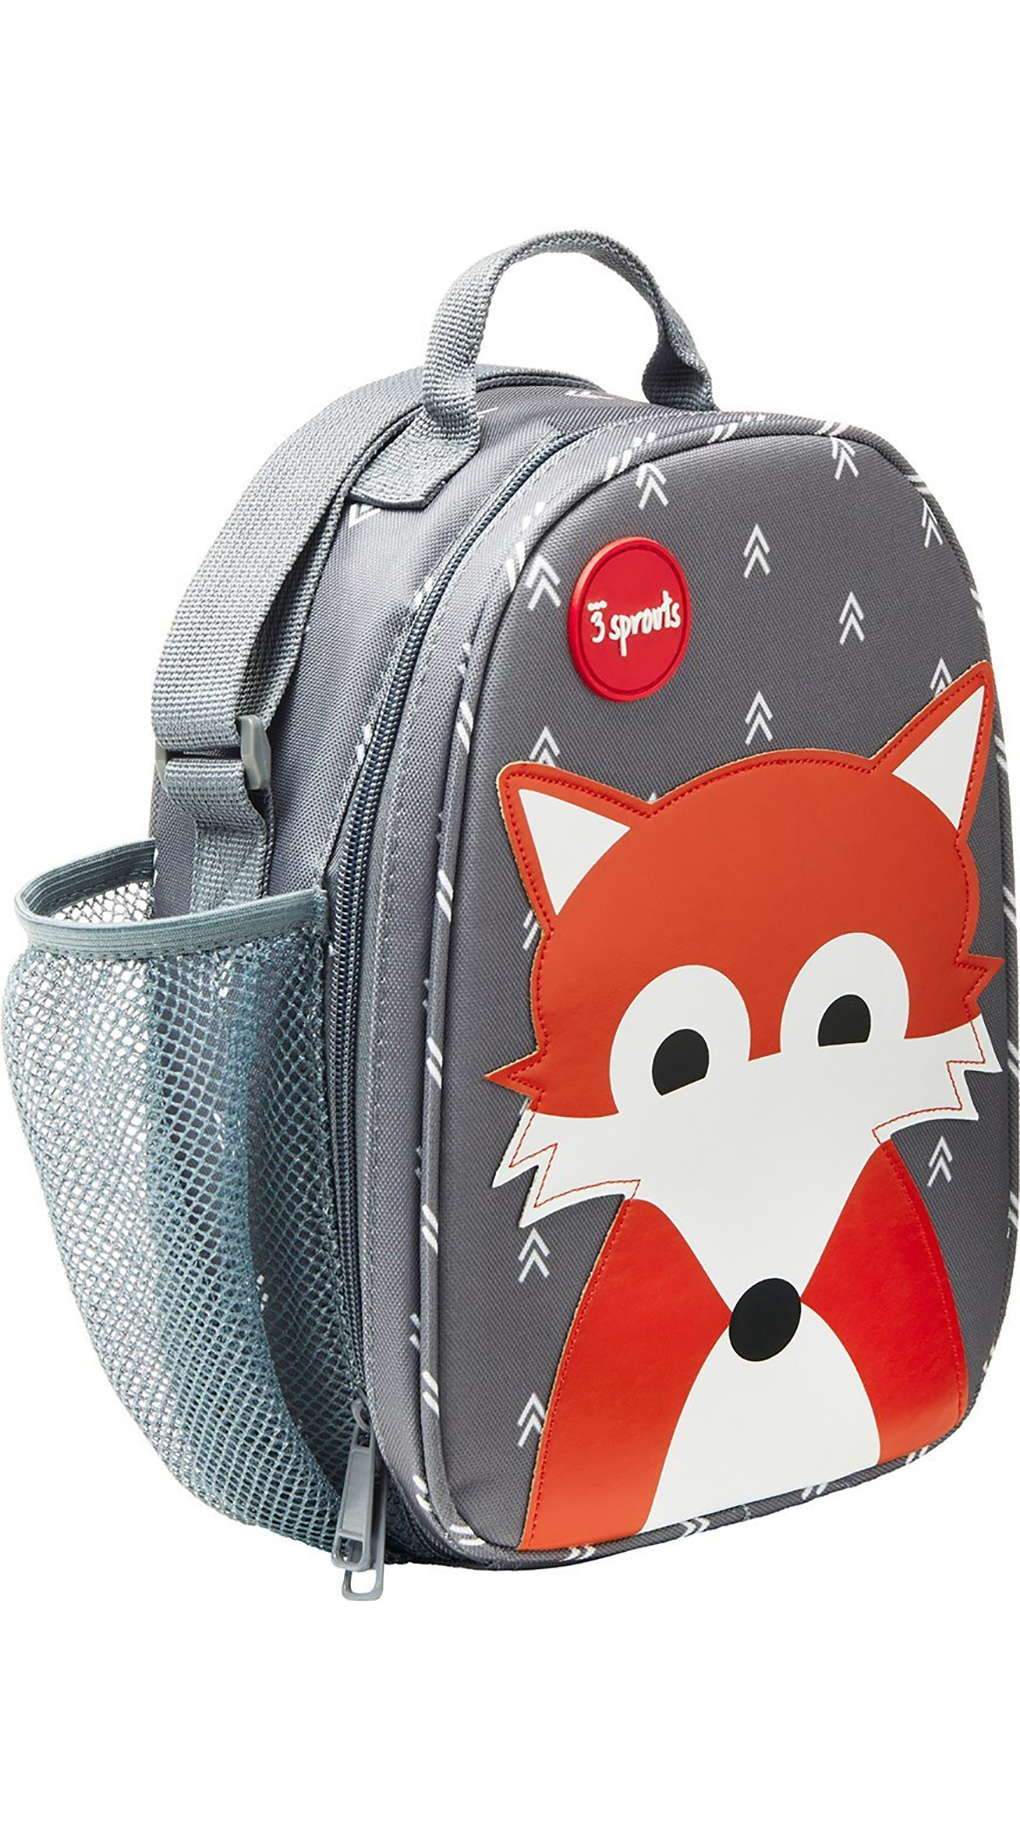 3sprouts lunch bag fox - 3 sprouts